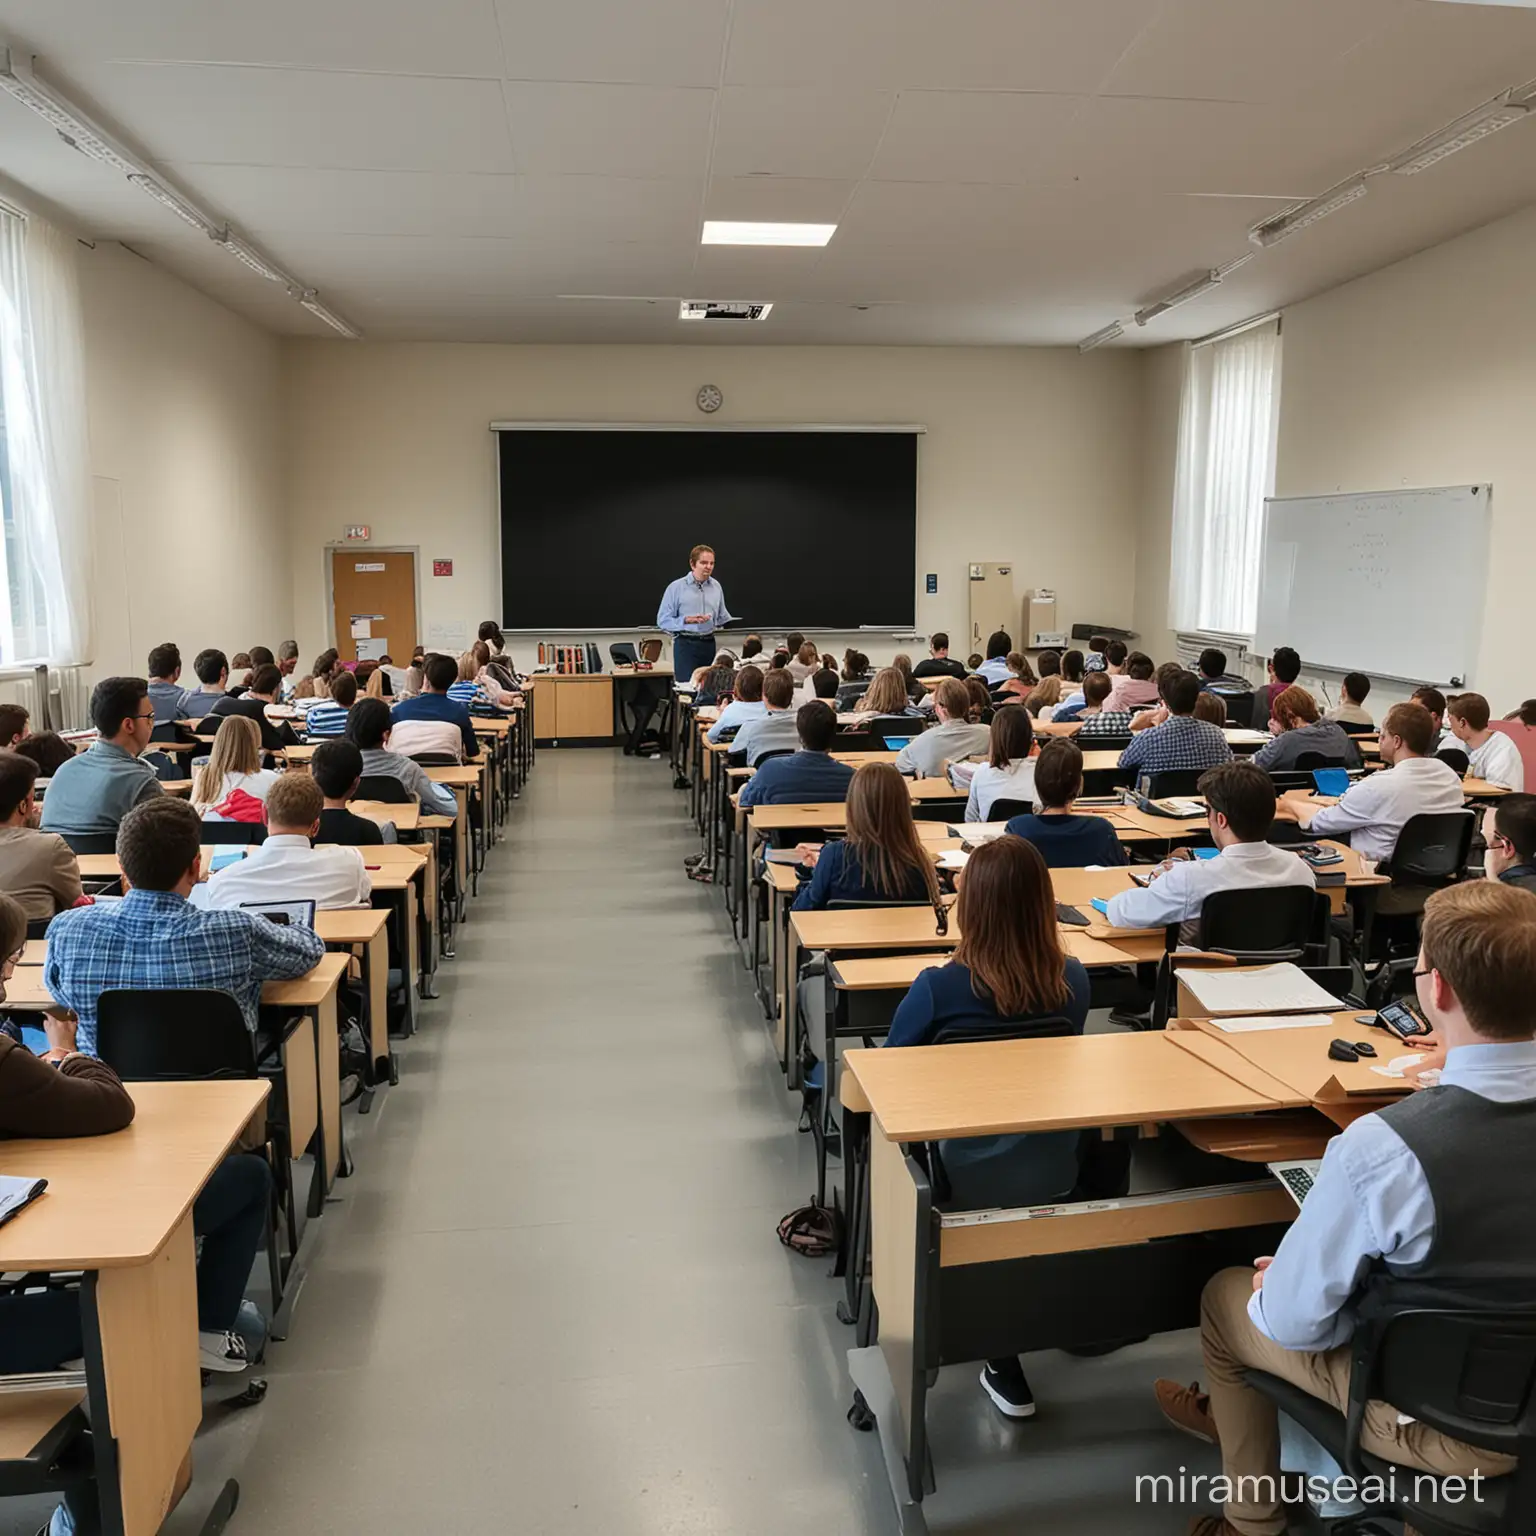 I want a photo of the university class where the professor is teaching about software in the doctoral degree. I want the photo to be from the perspective of a student, that is, as if you were sitting in class and watching the professor teach. The angle of the photo should be as if you were sitting behind the bench and watching the class. I want to see the class from a student's point of view